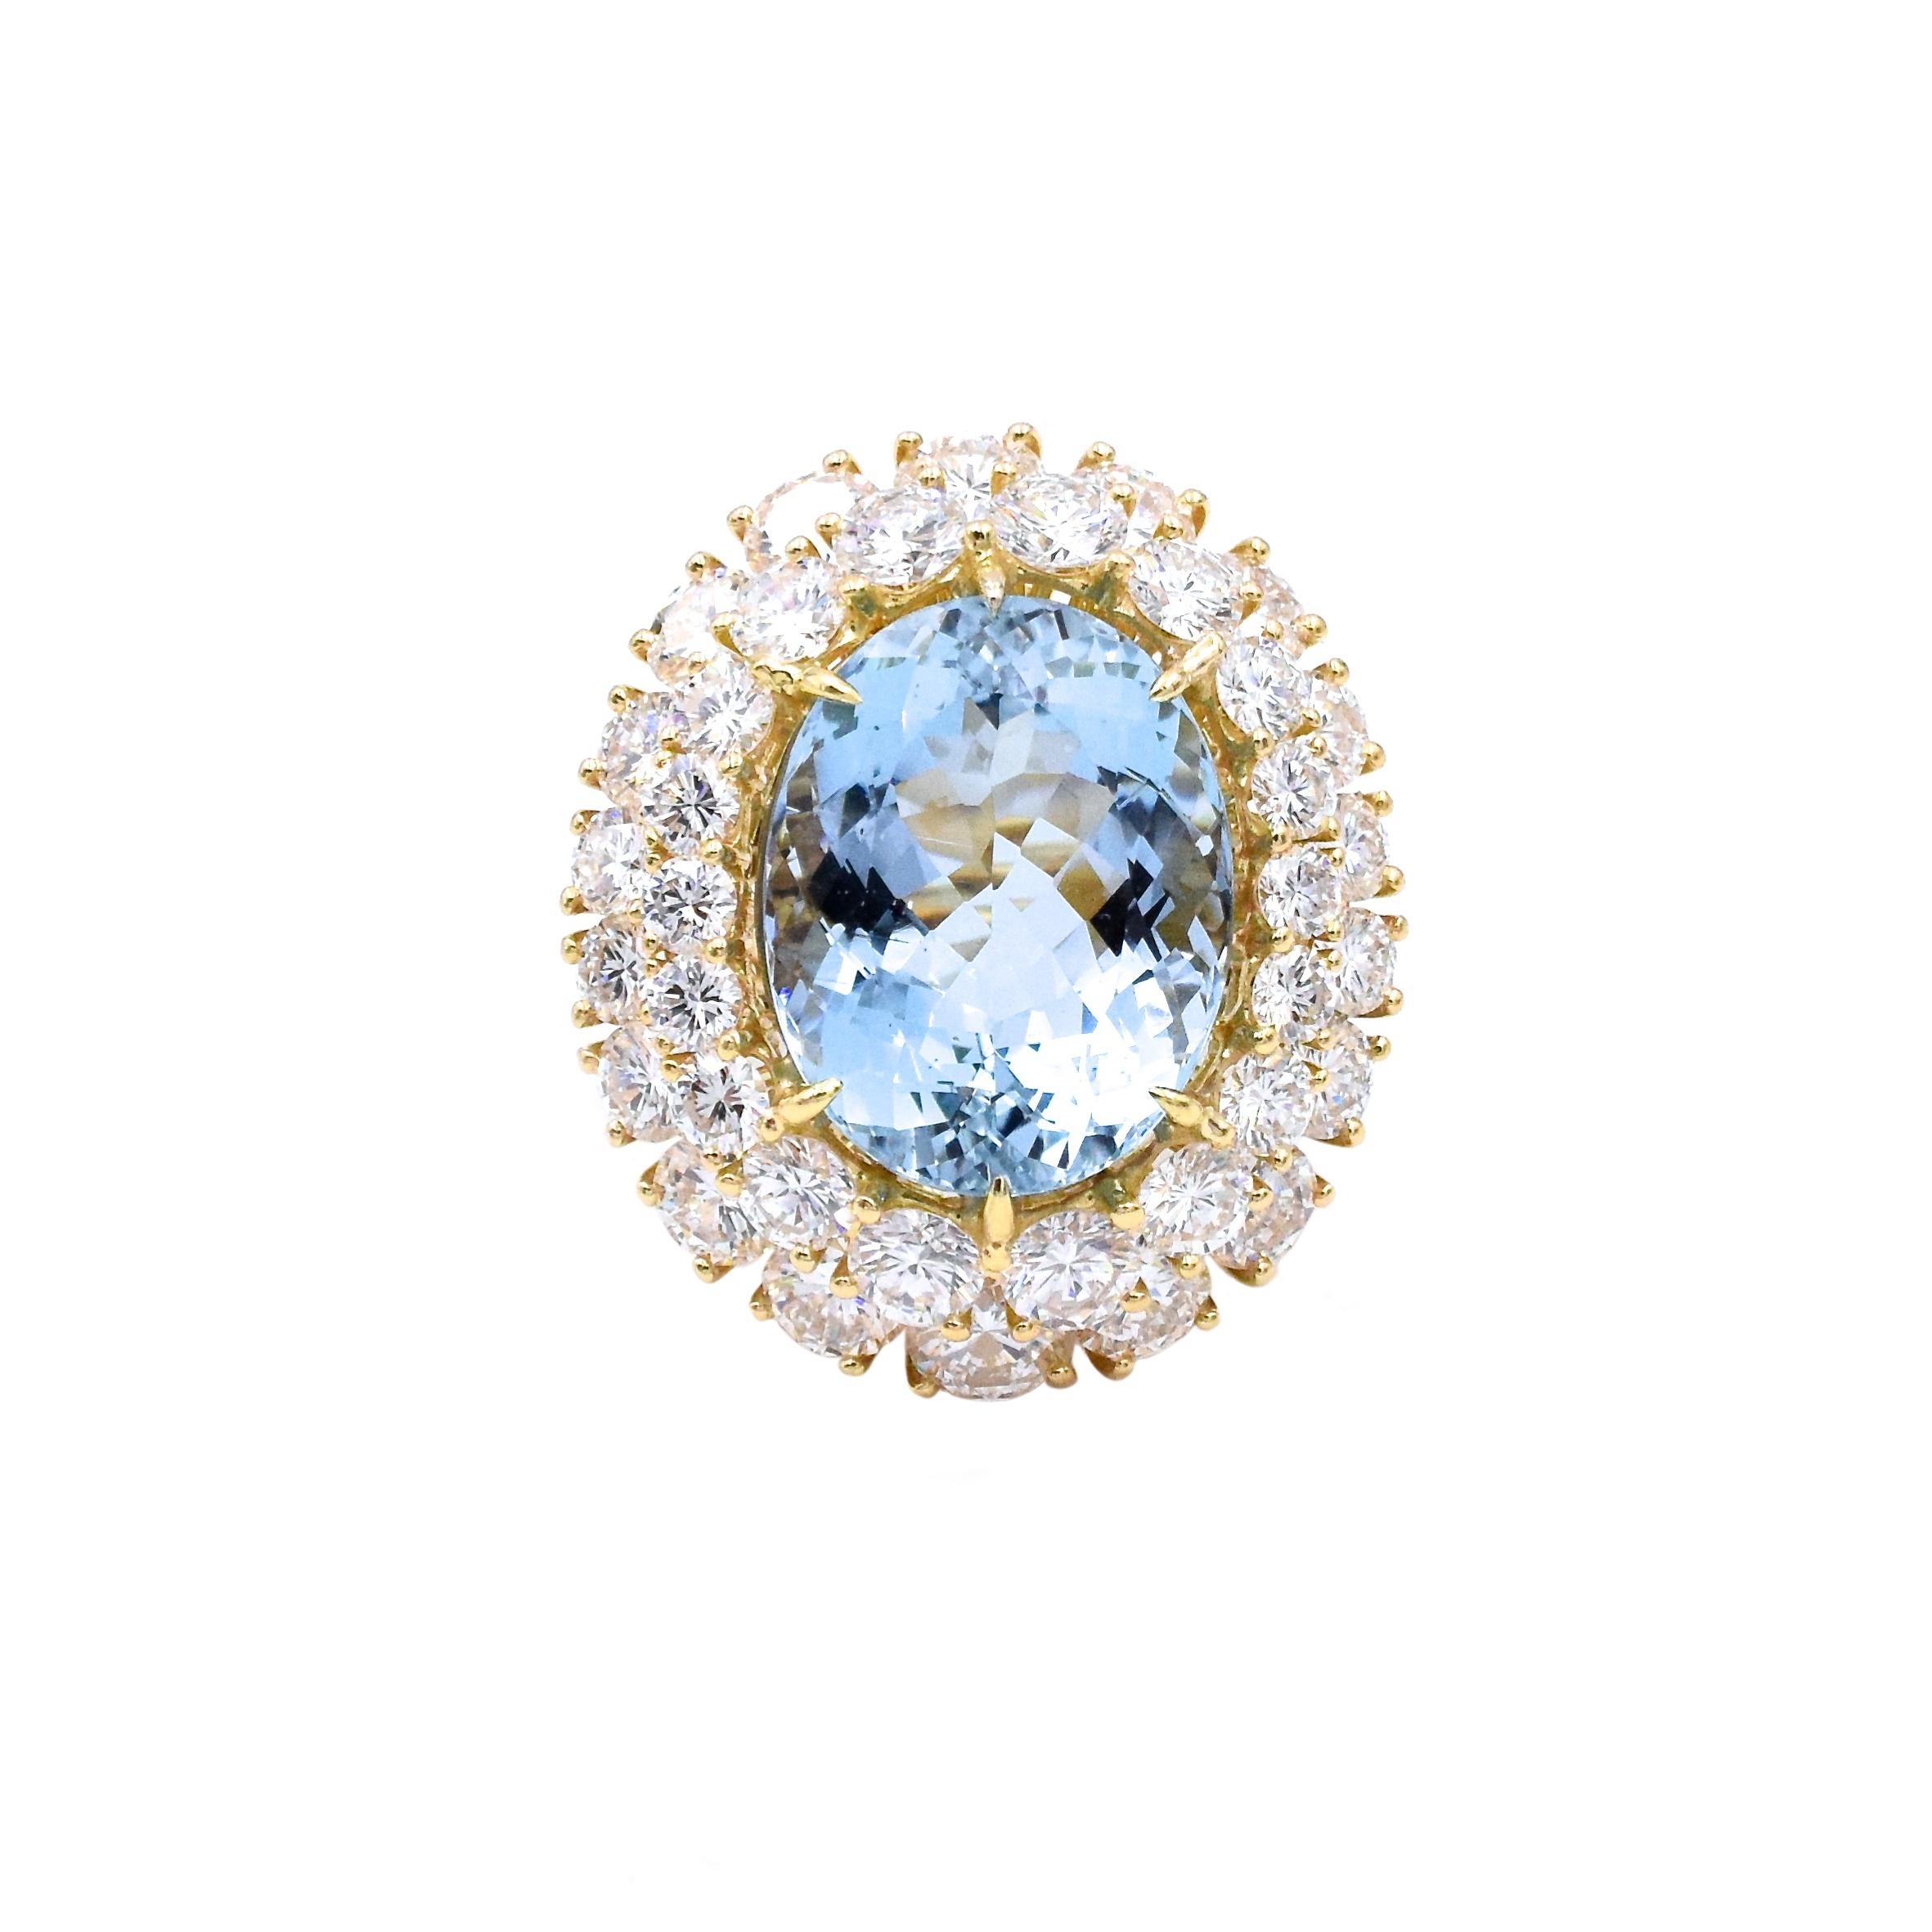 Impressive  Aquamarine & Diamond Ring!!
Makes a great statement!
Center aquamarine is 14.20 carats with double raw diamonds with estimated weight of 10 carats set in yellow gold. Color of the diamonds are E/F &clarity is VS
The ring can be 